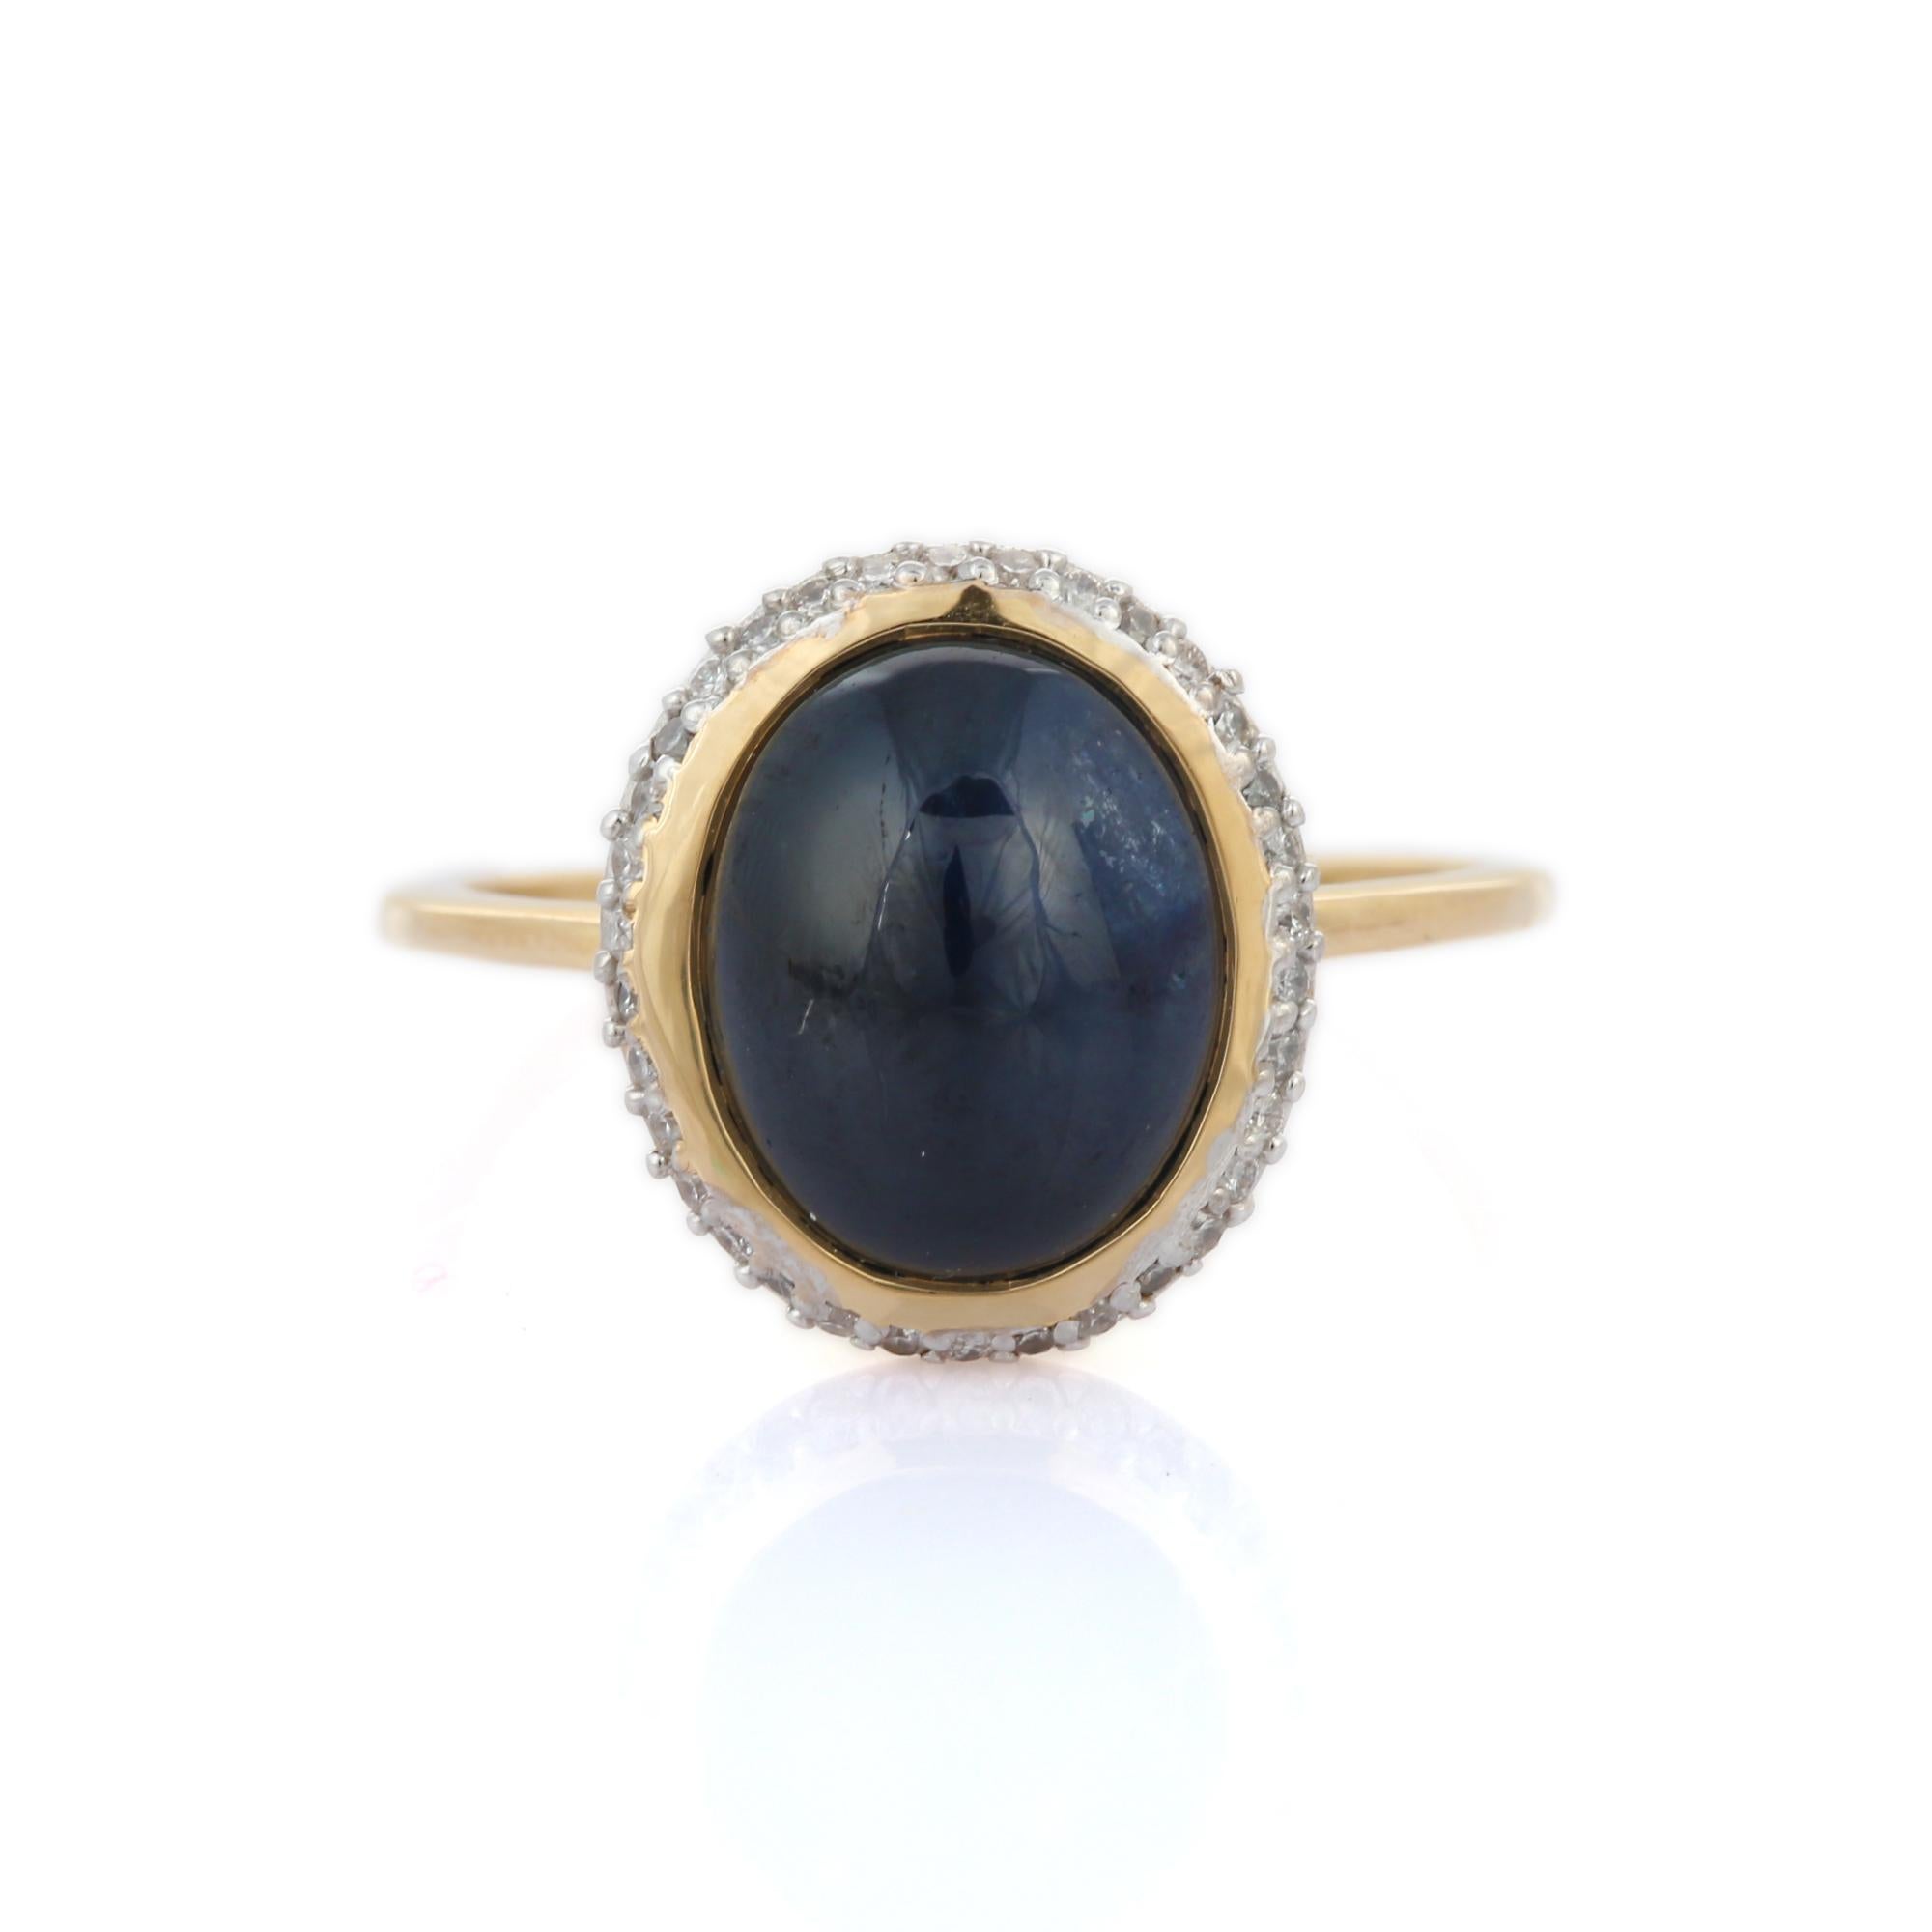 For Sale:  Splendid 4.94 ct Sapphire Diamond Statement Cocktail Ring in 14K Yellow Gold 2